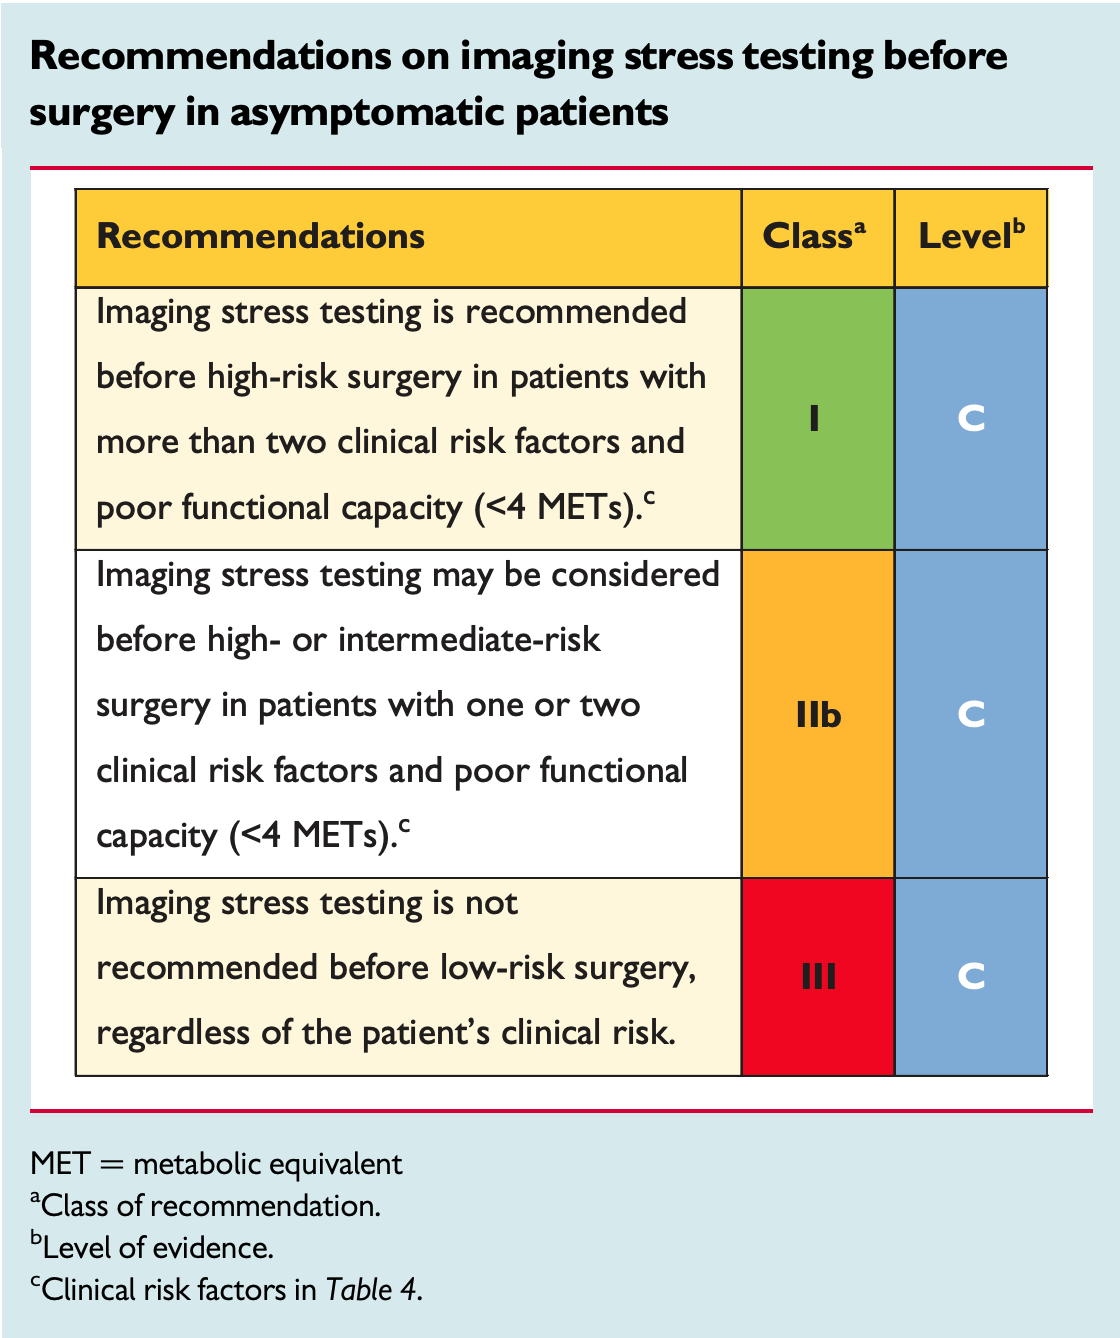 Recommendations on imaging stress testing before surgery in asymptomatic patients